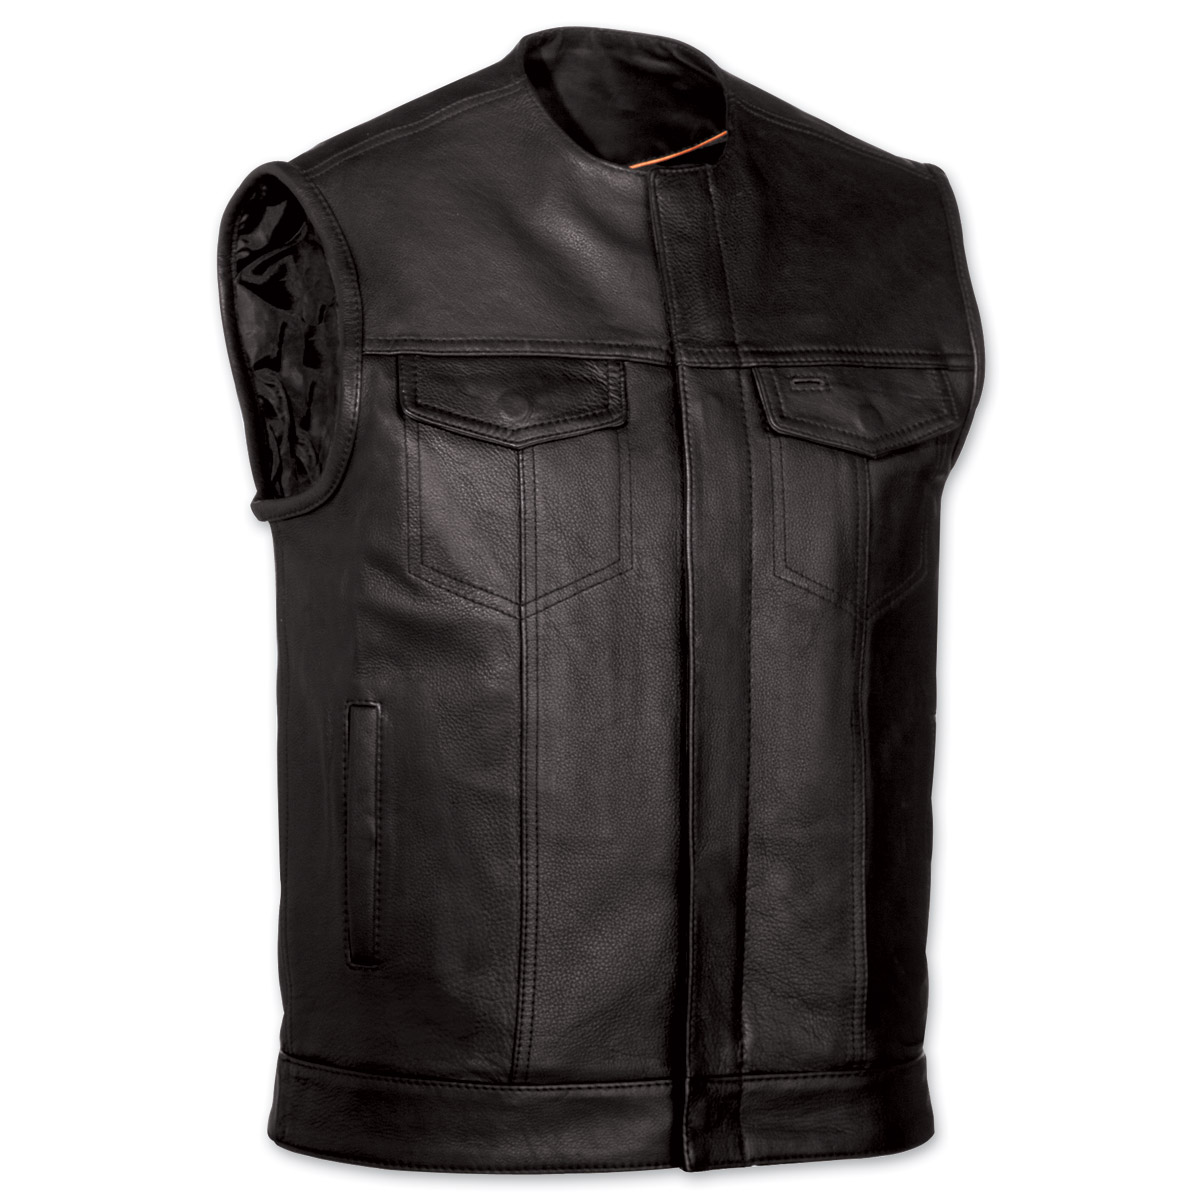 This winter go stylish with leather vests